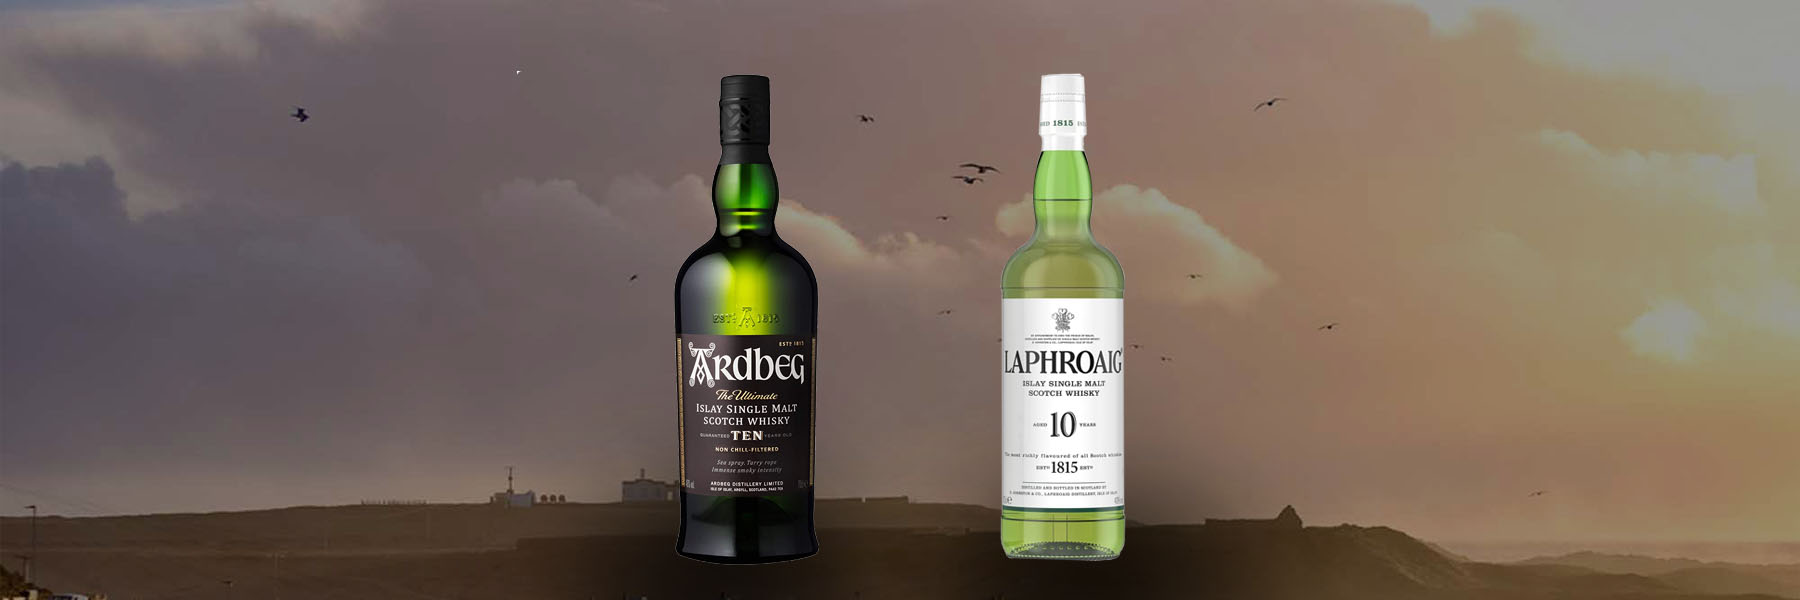 Ardbeg 10 vs Laphroaig 10 | Top of the Peats, which is best?